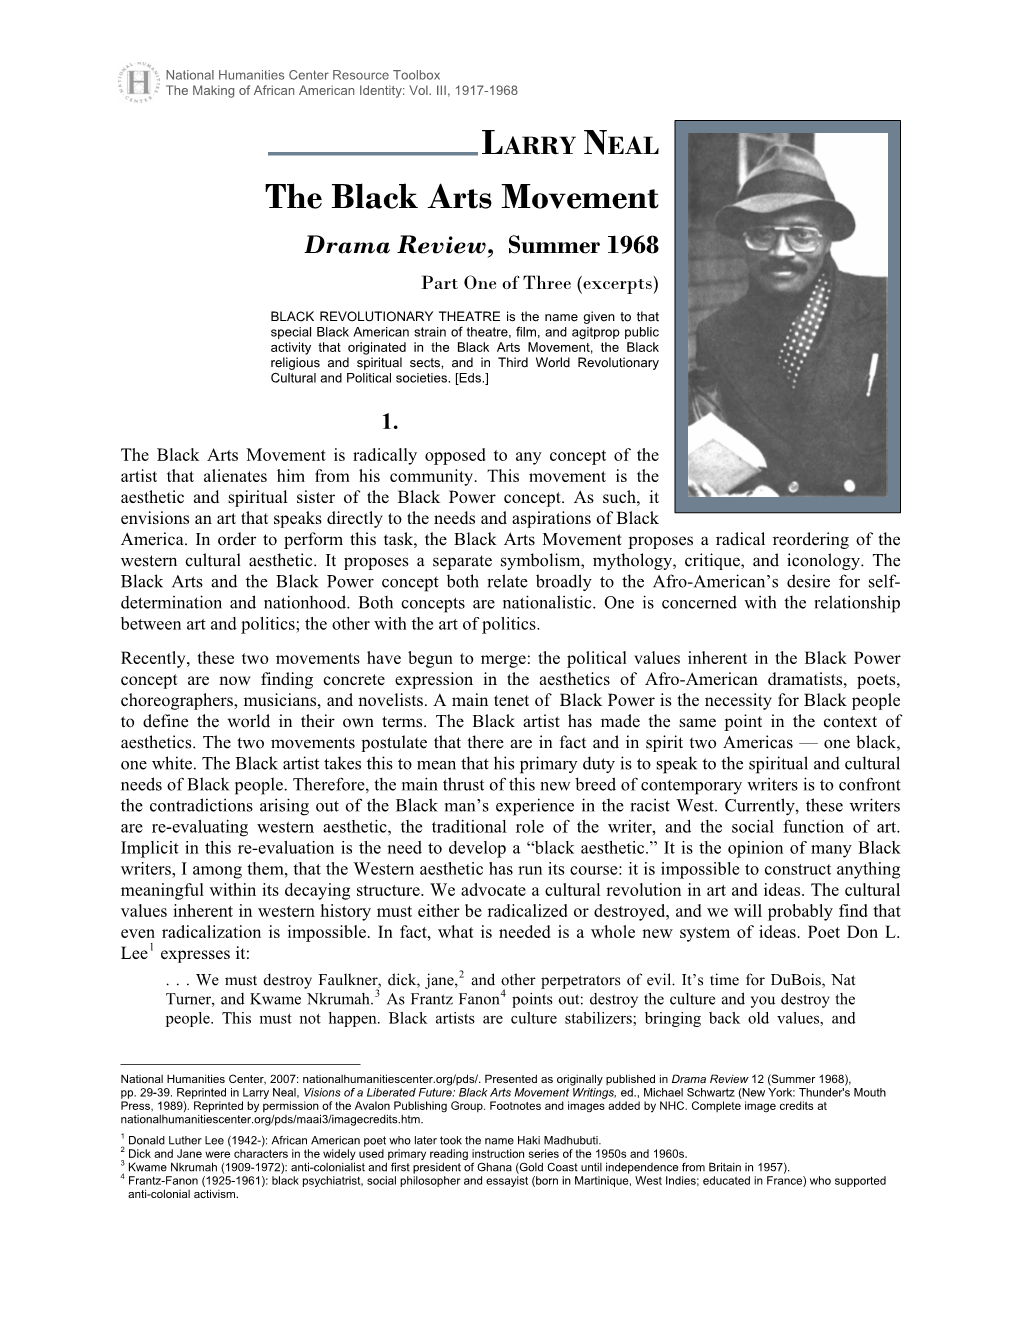 The Black Arts Movement Drama Review, *Summer 1968 Part One of Three (Excerpts)